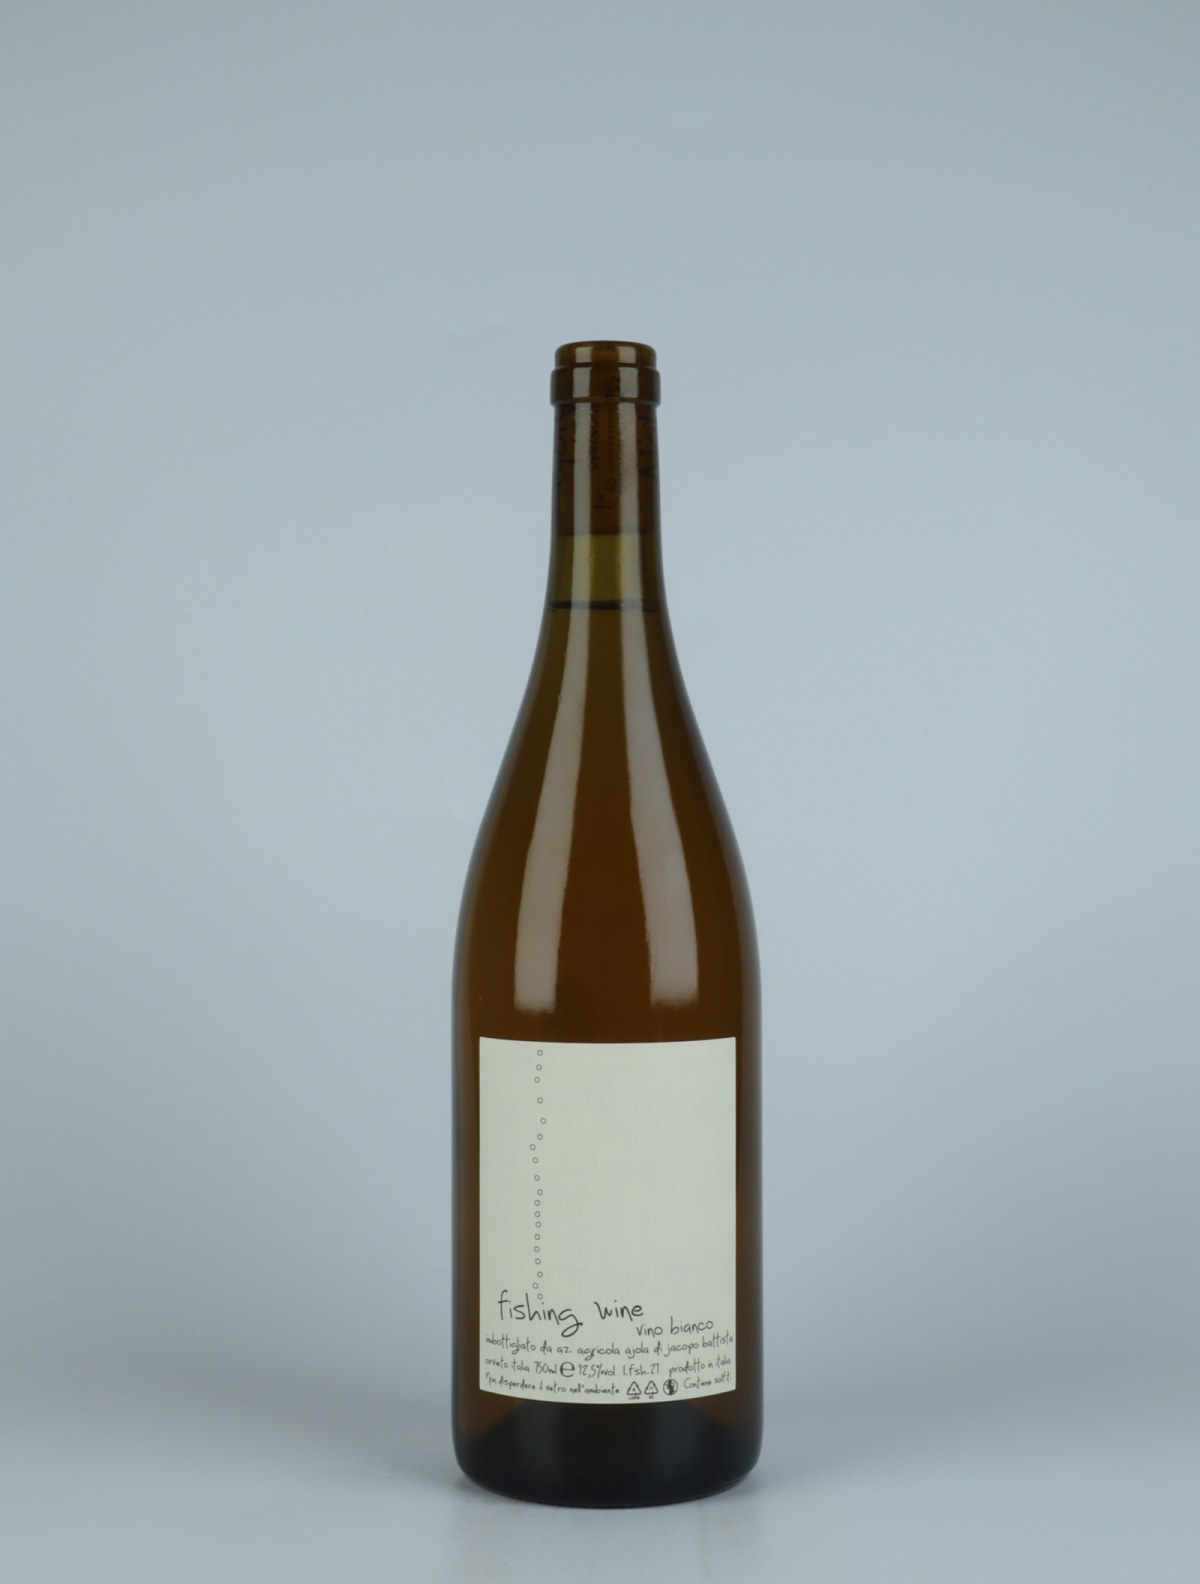 A bottle 2021 Bianco Fishing Wine White wine from Ajola, Umbria in Italy